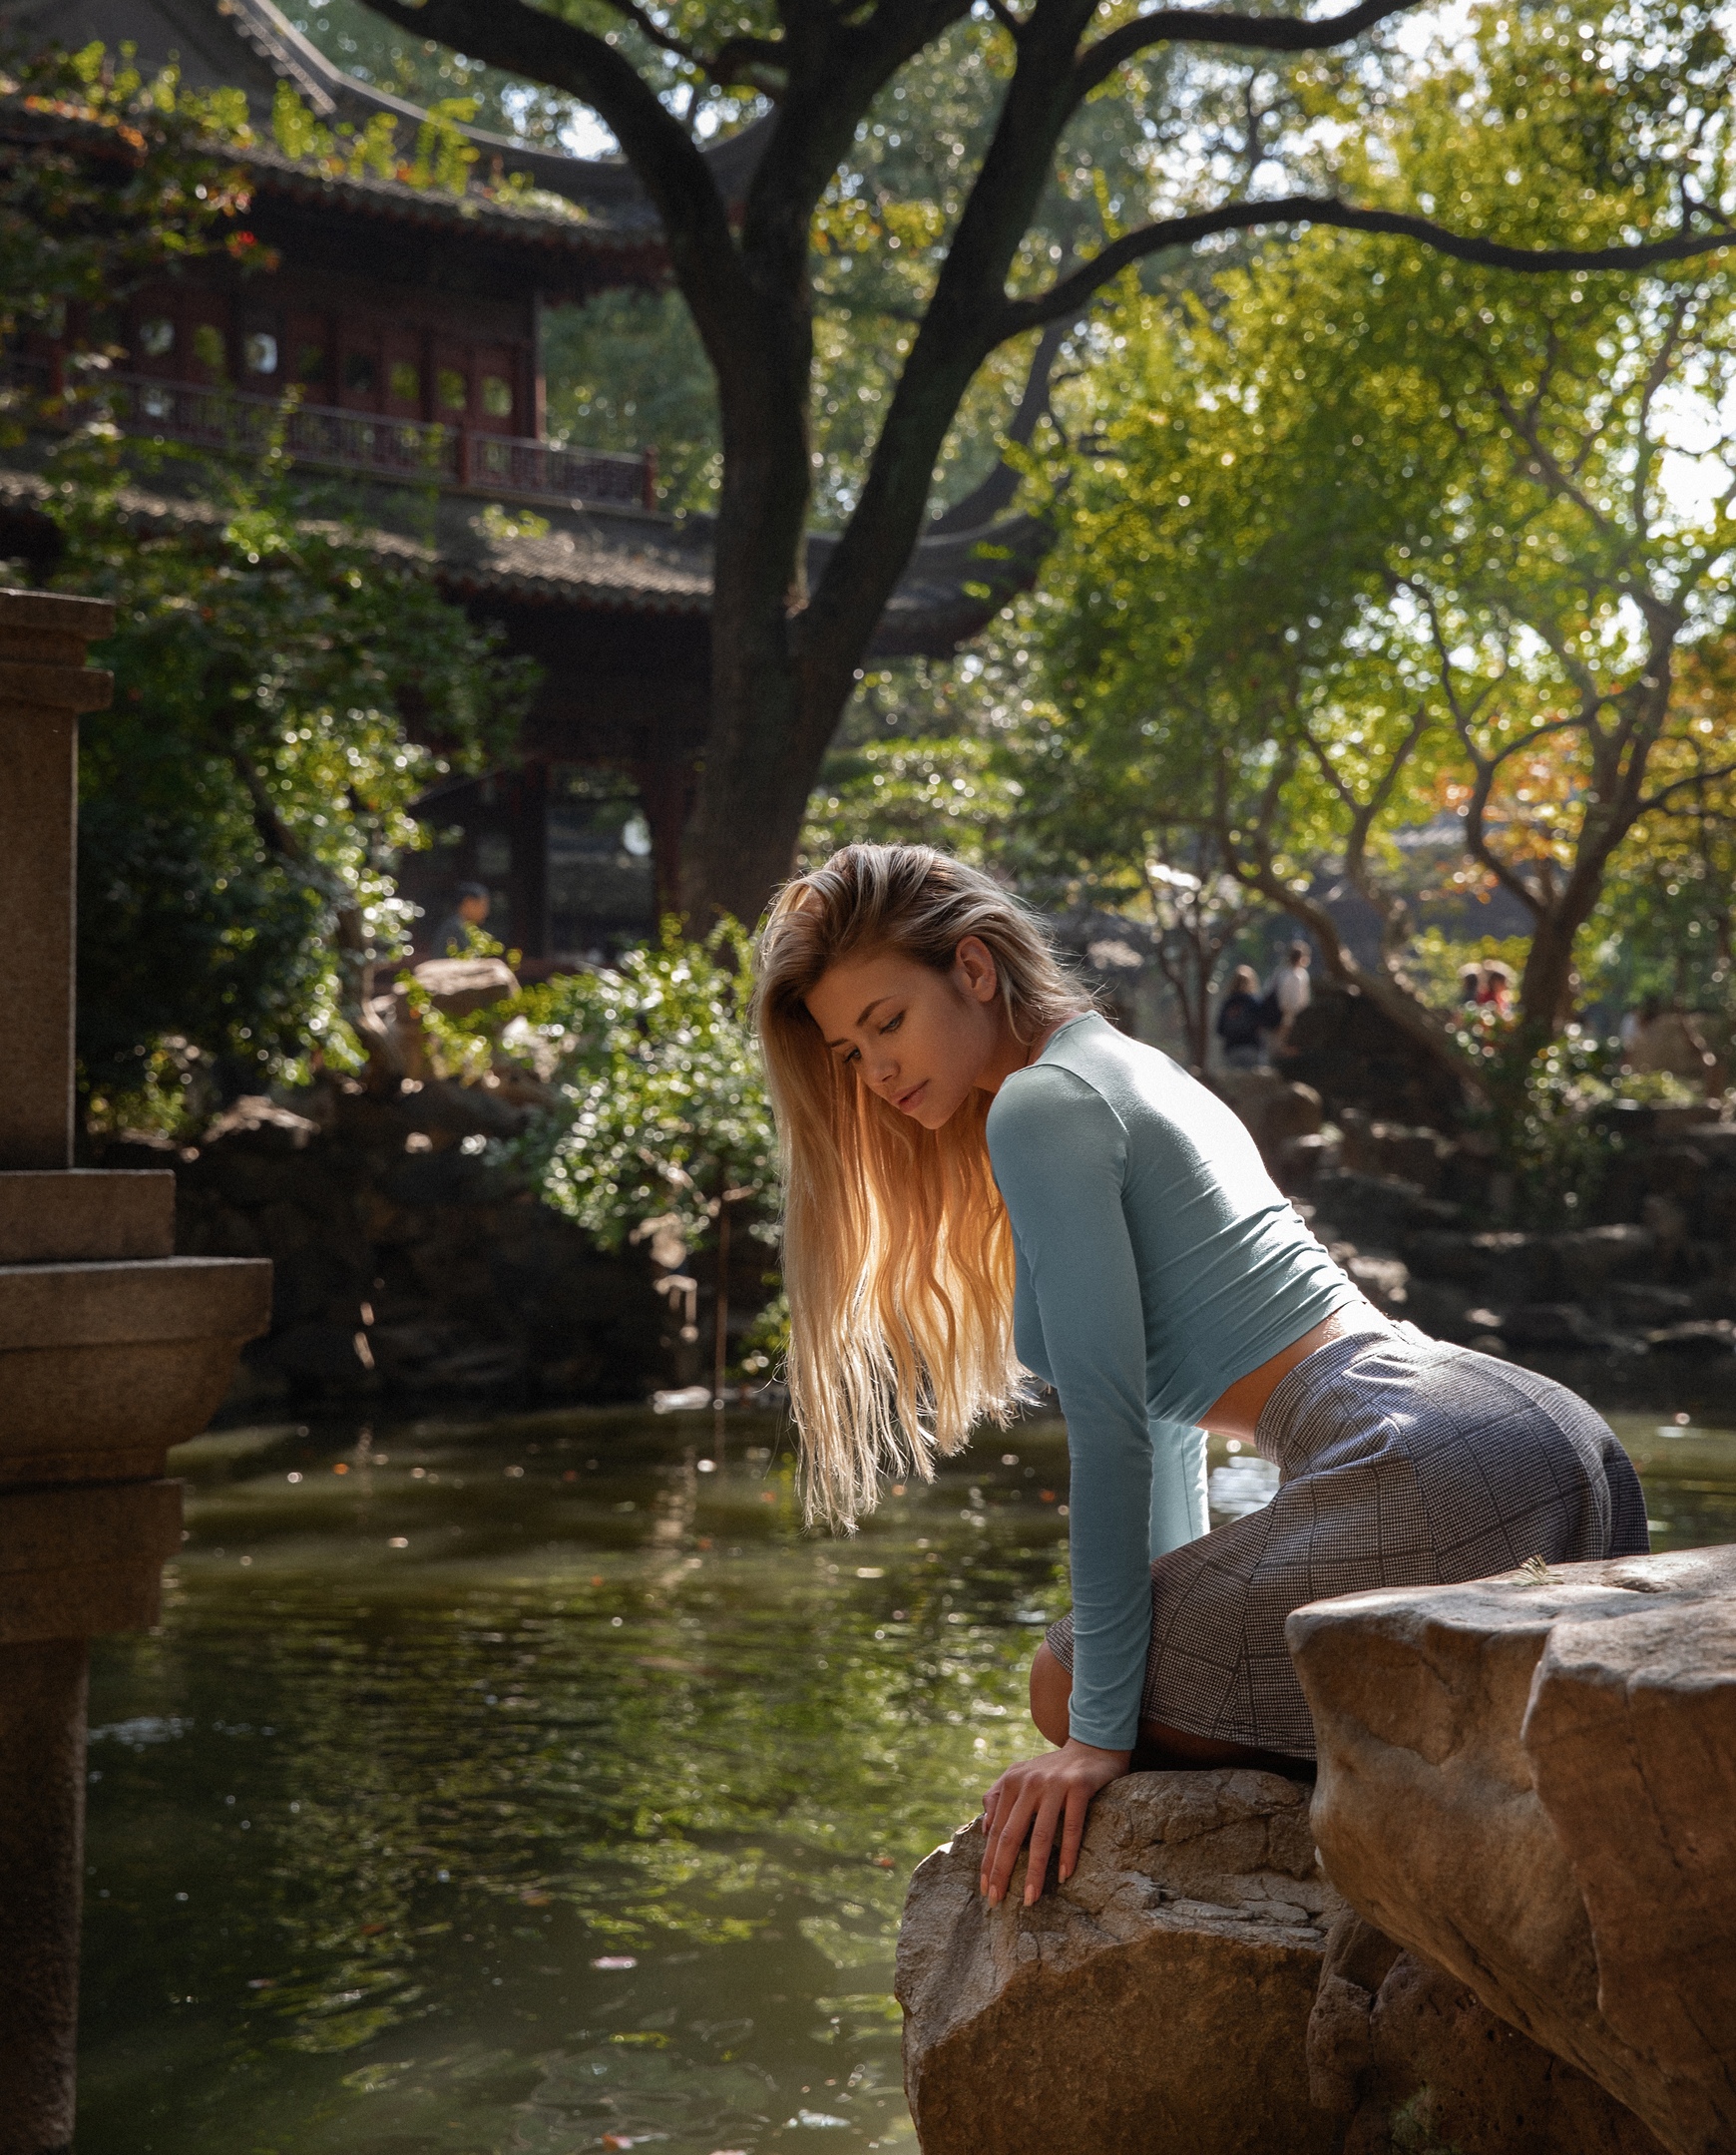 Women Model Blonde Long Hair Fountain Water Trees Asian Architecture Crop Top Skirt Painted Nails Ou 1740x2160